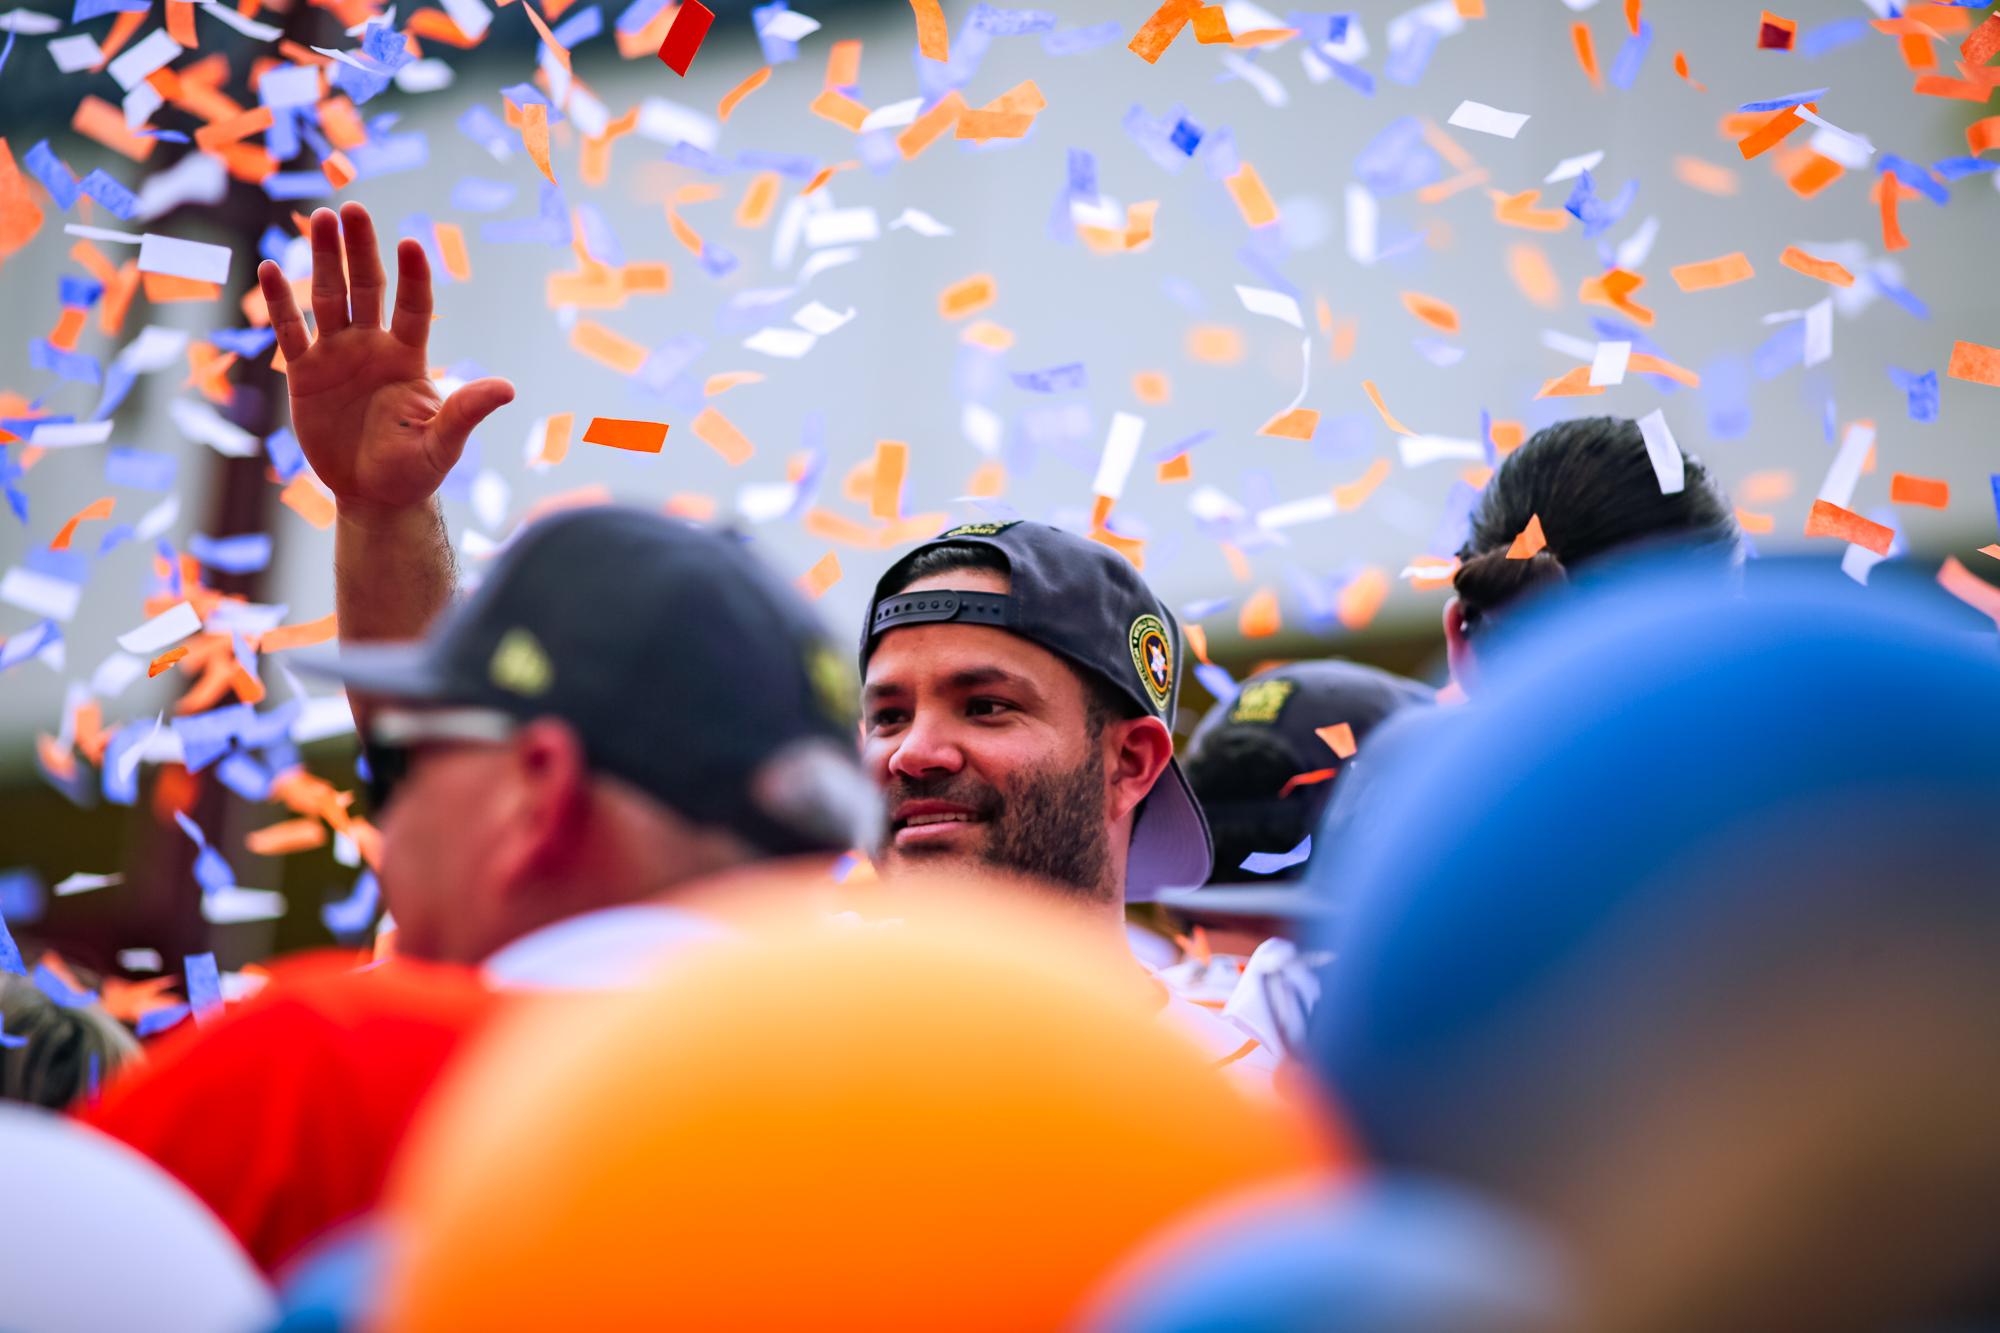 Mattress Mack, Paul Wall, Bun B and more on Astros victory parade float